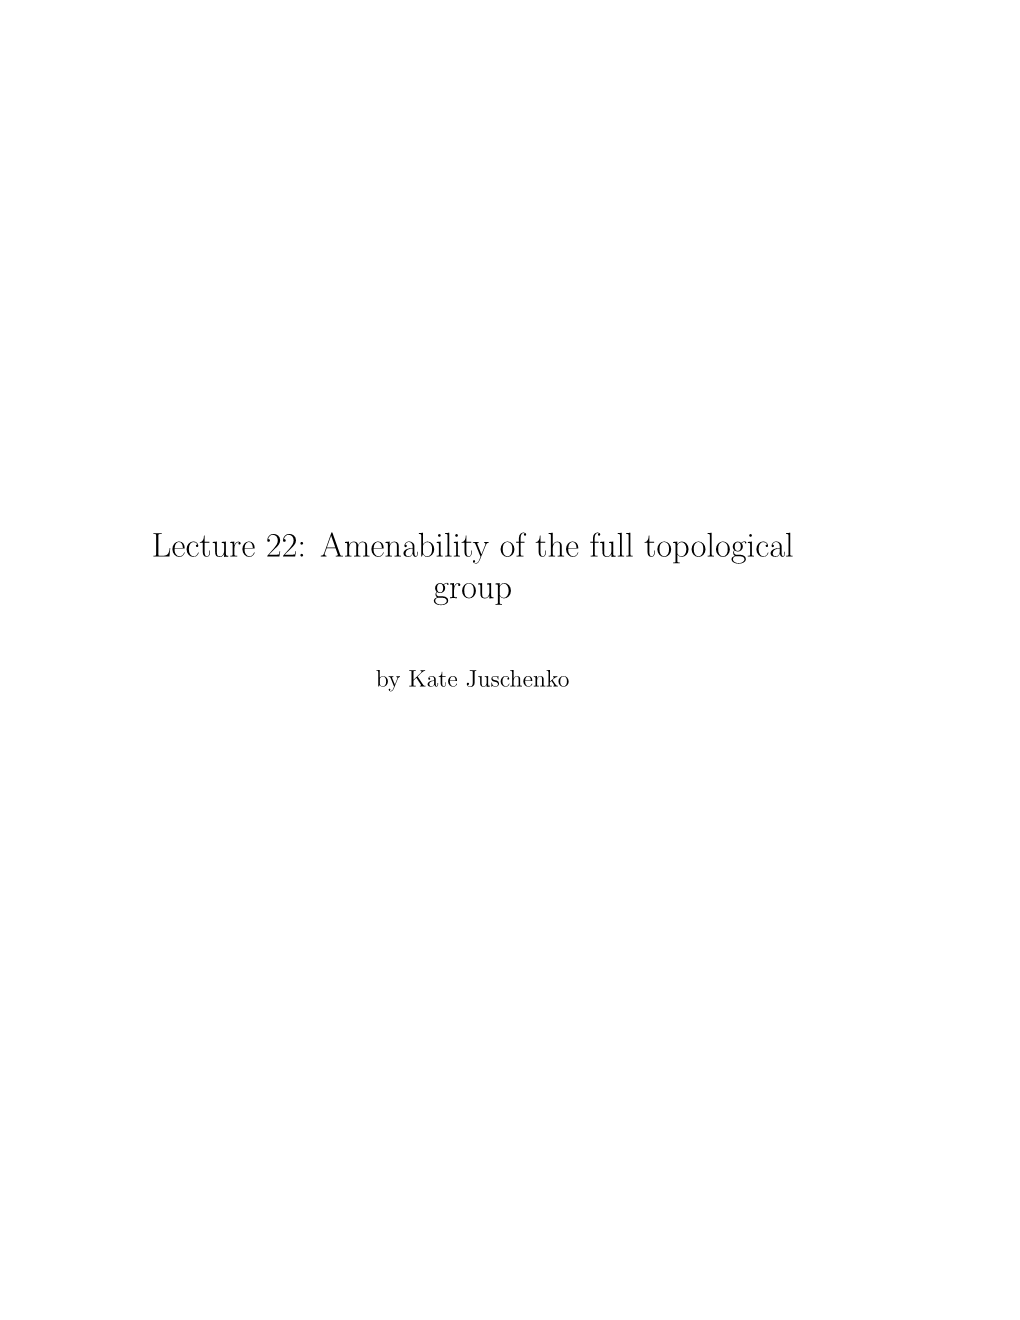 Lecture 22: Amenability of the Full Topological Group